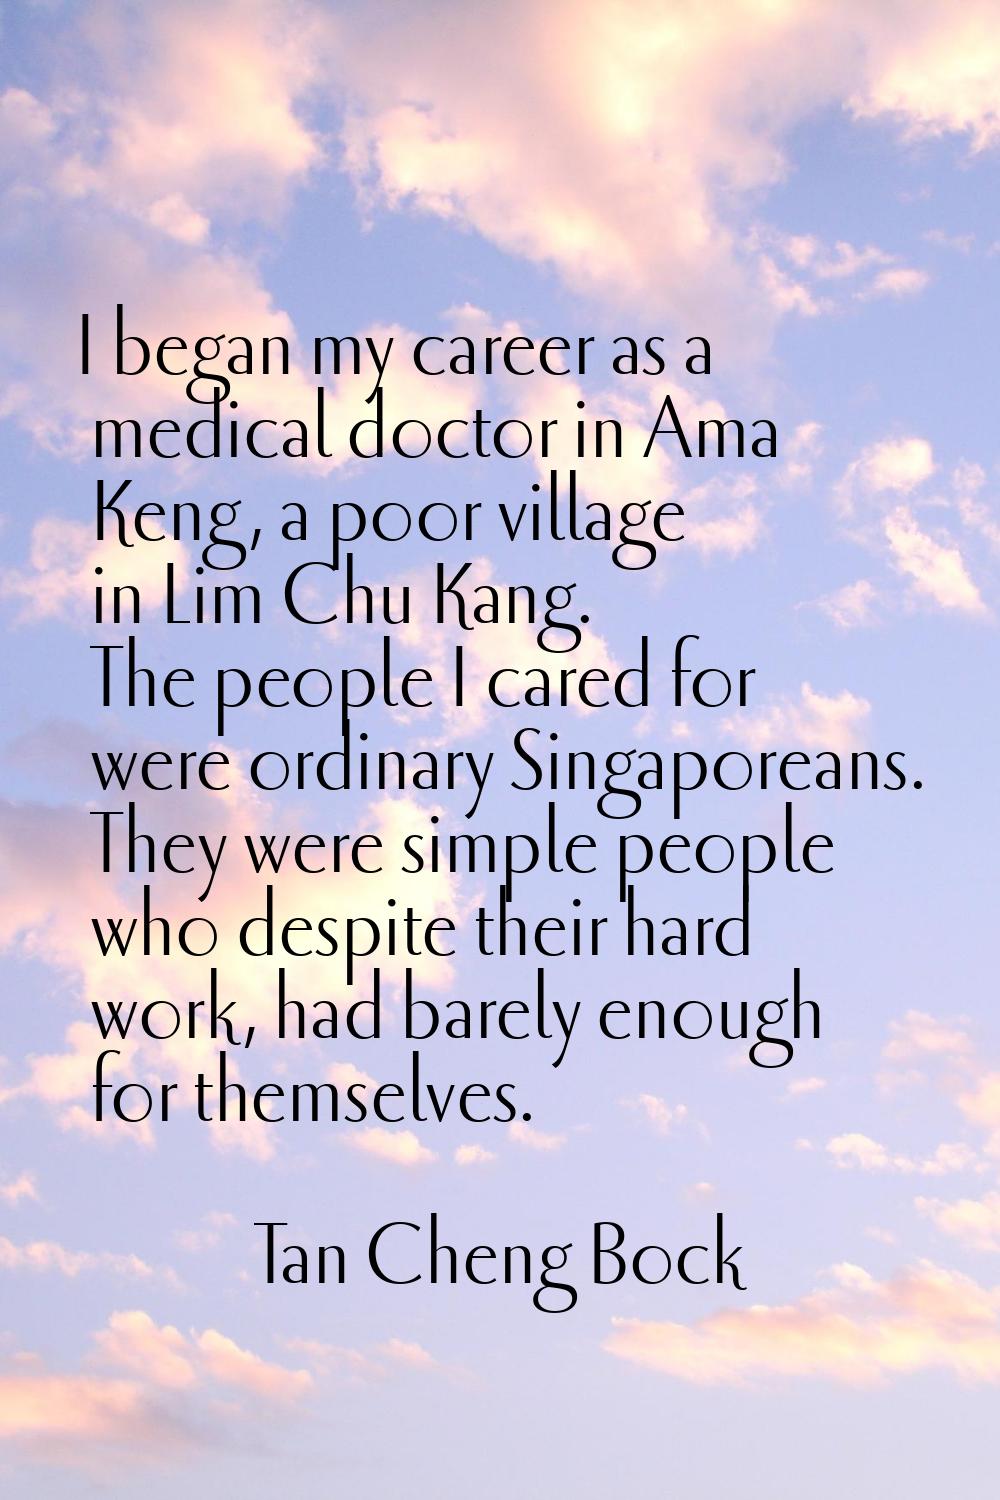 I began my career as a medical doctor in Ama Keng, a poor village in Lim Chu Kang. The people I car